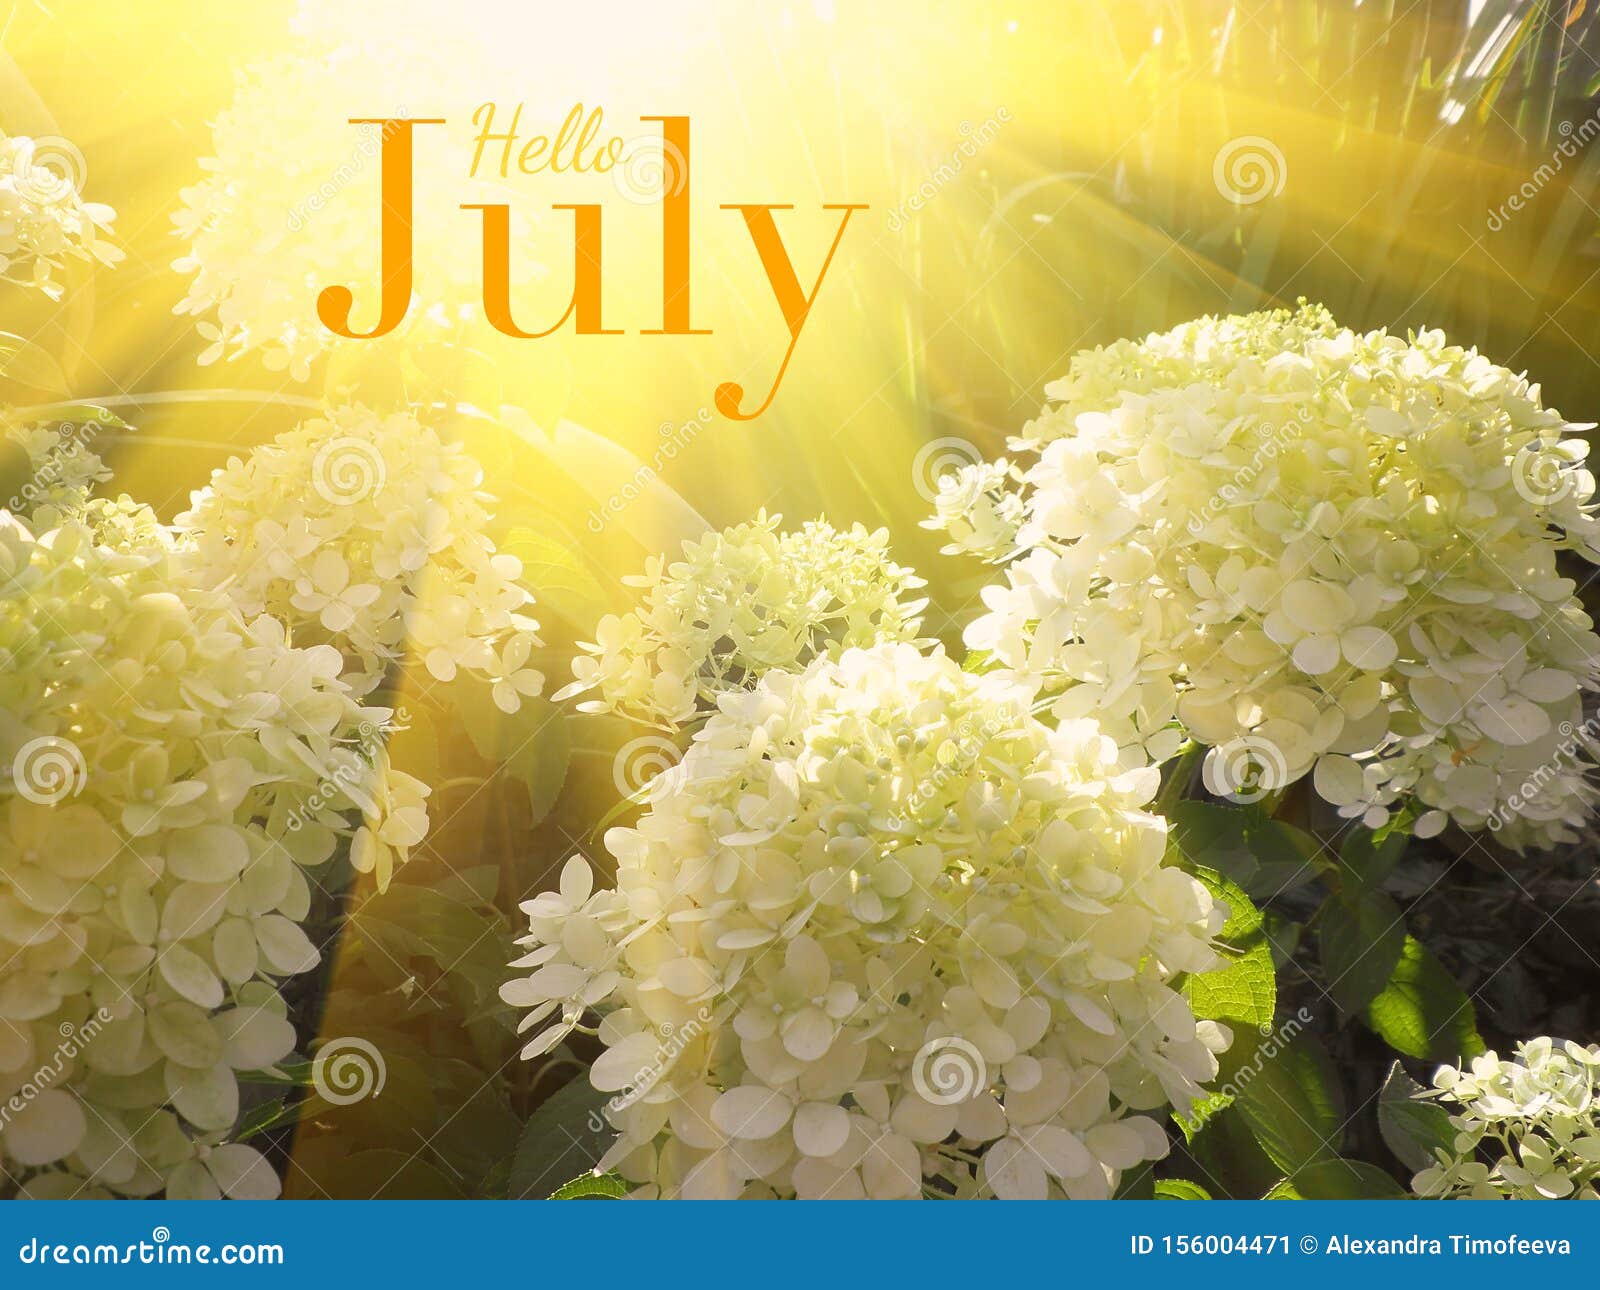 Hello July - Inspirational Motivation Quote Stock Image - Image of